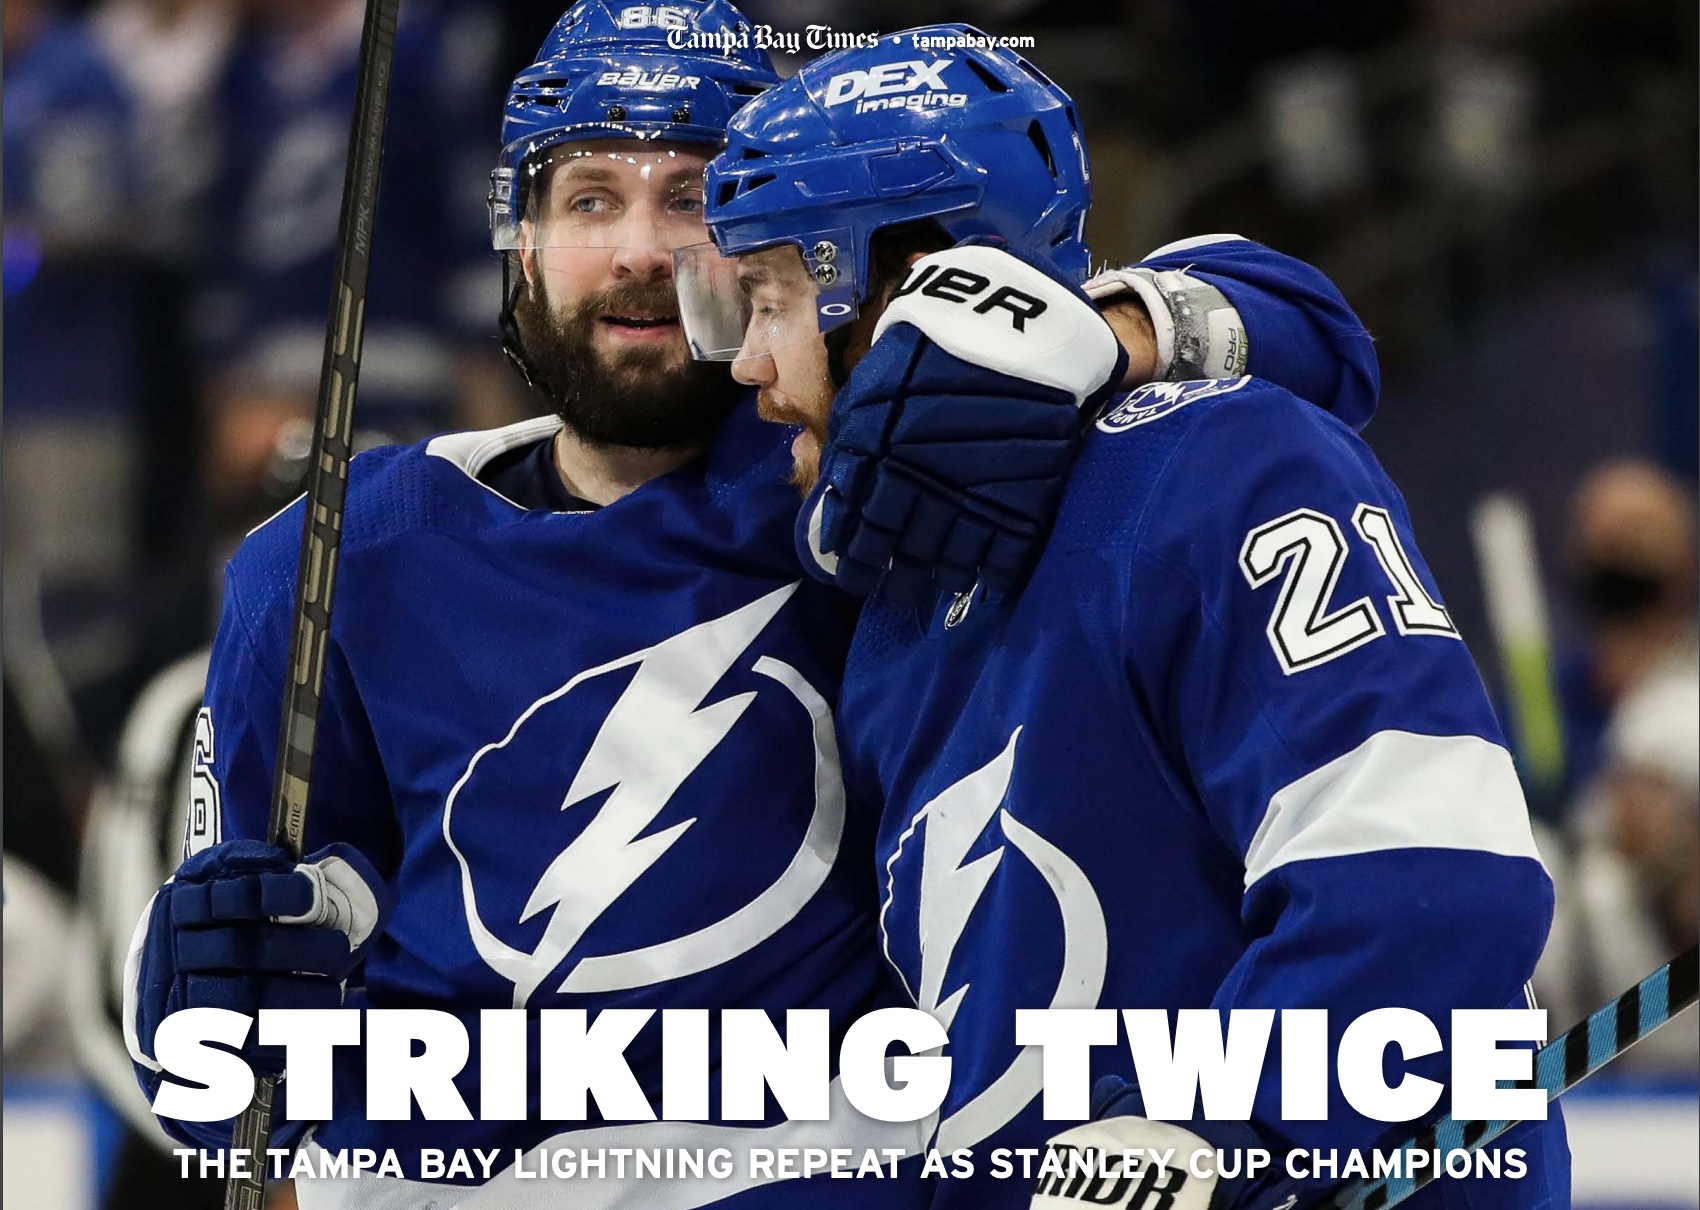 47 - Lightning strikes twice! ⚡ ⚡ Congrats to the back-to-back Stanley Cup  champion Tampa Bay Lightning!